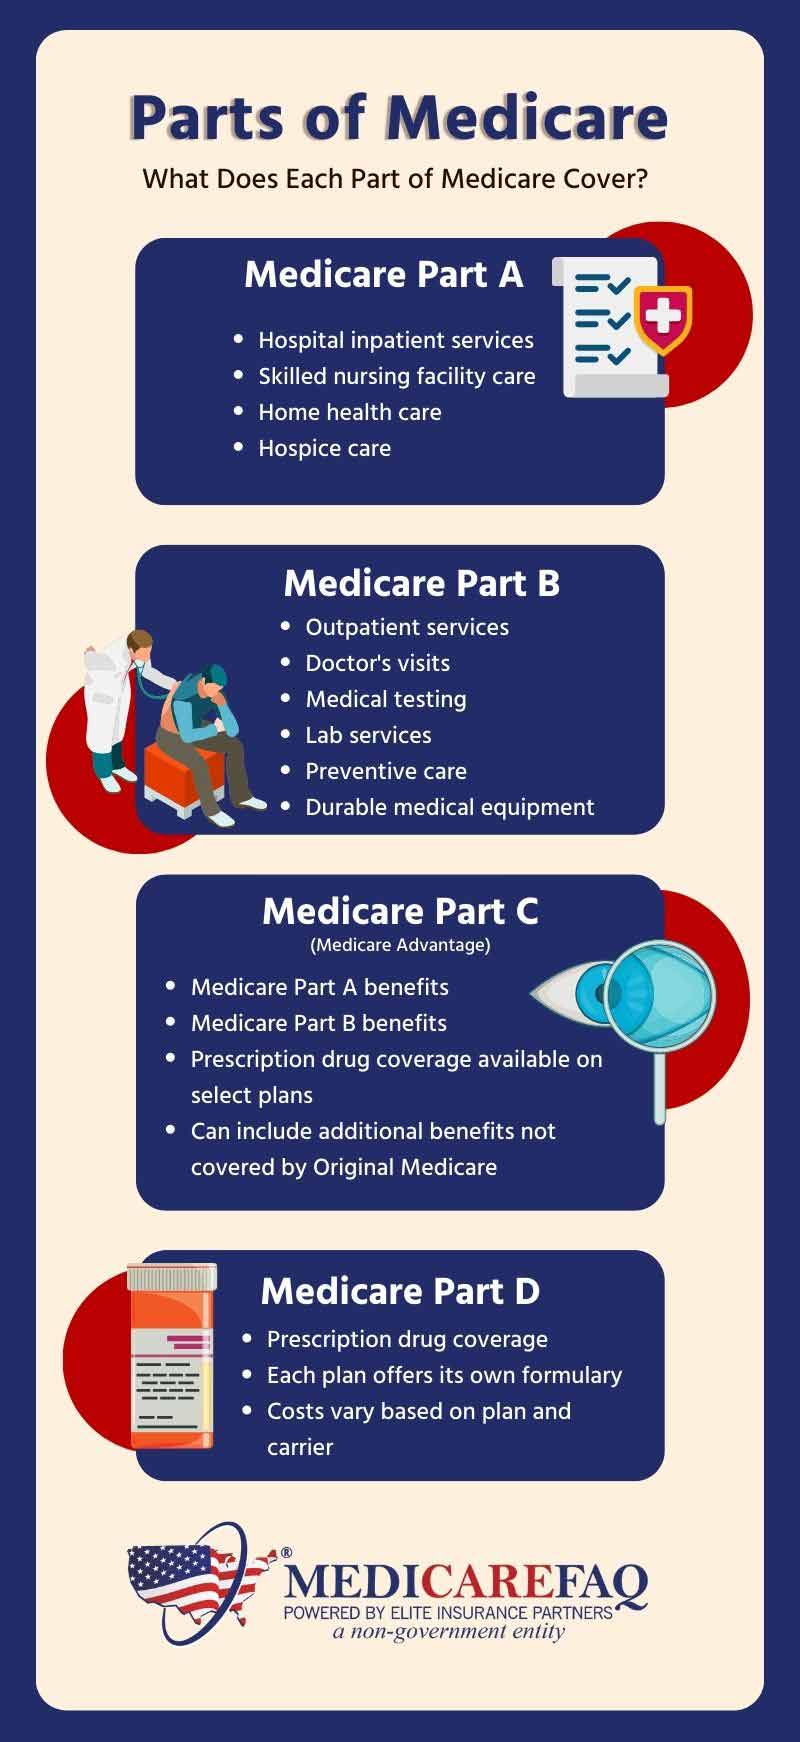 Learn about the four parts of Medicare: Medicare Part A, Part B, Part C, and Part D.